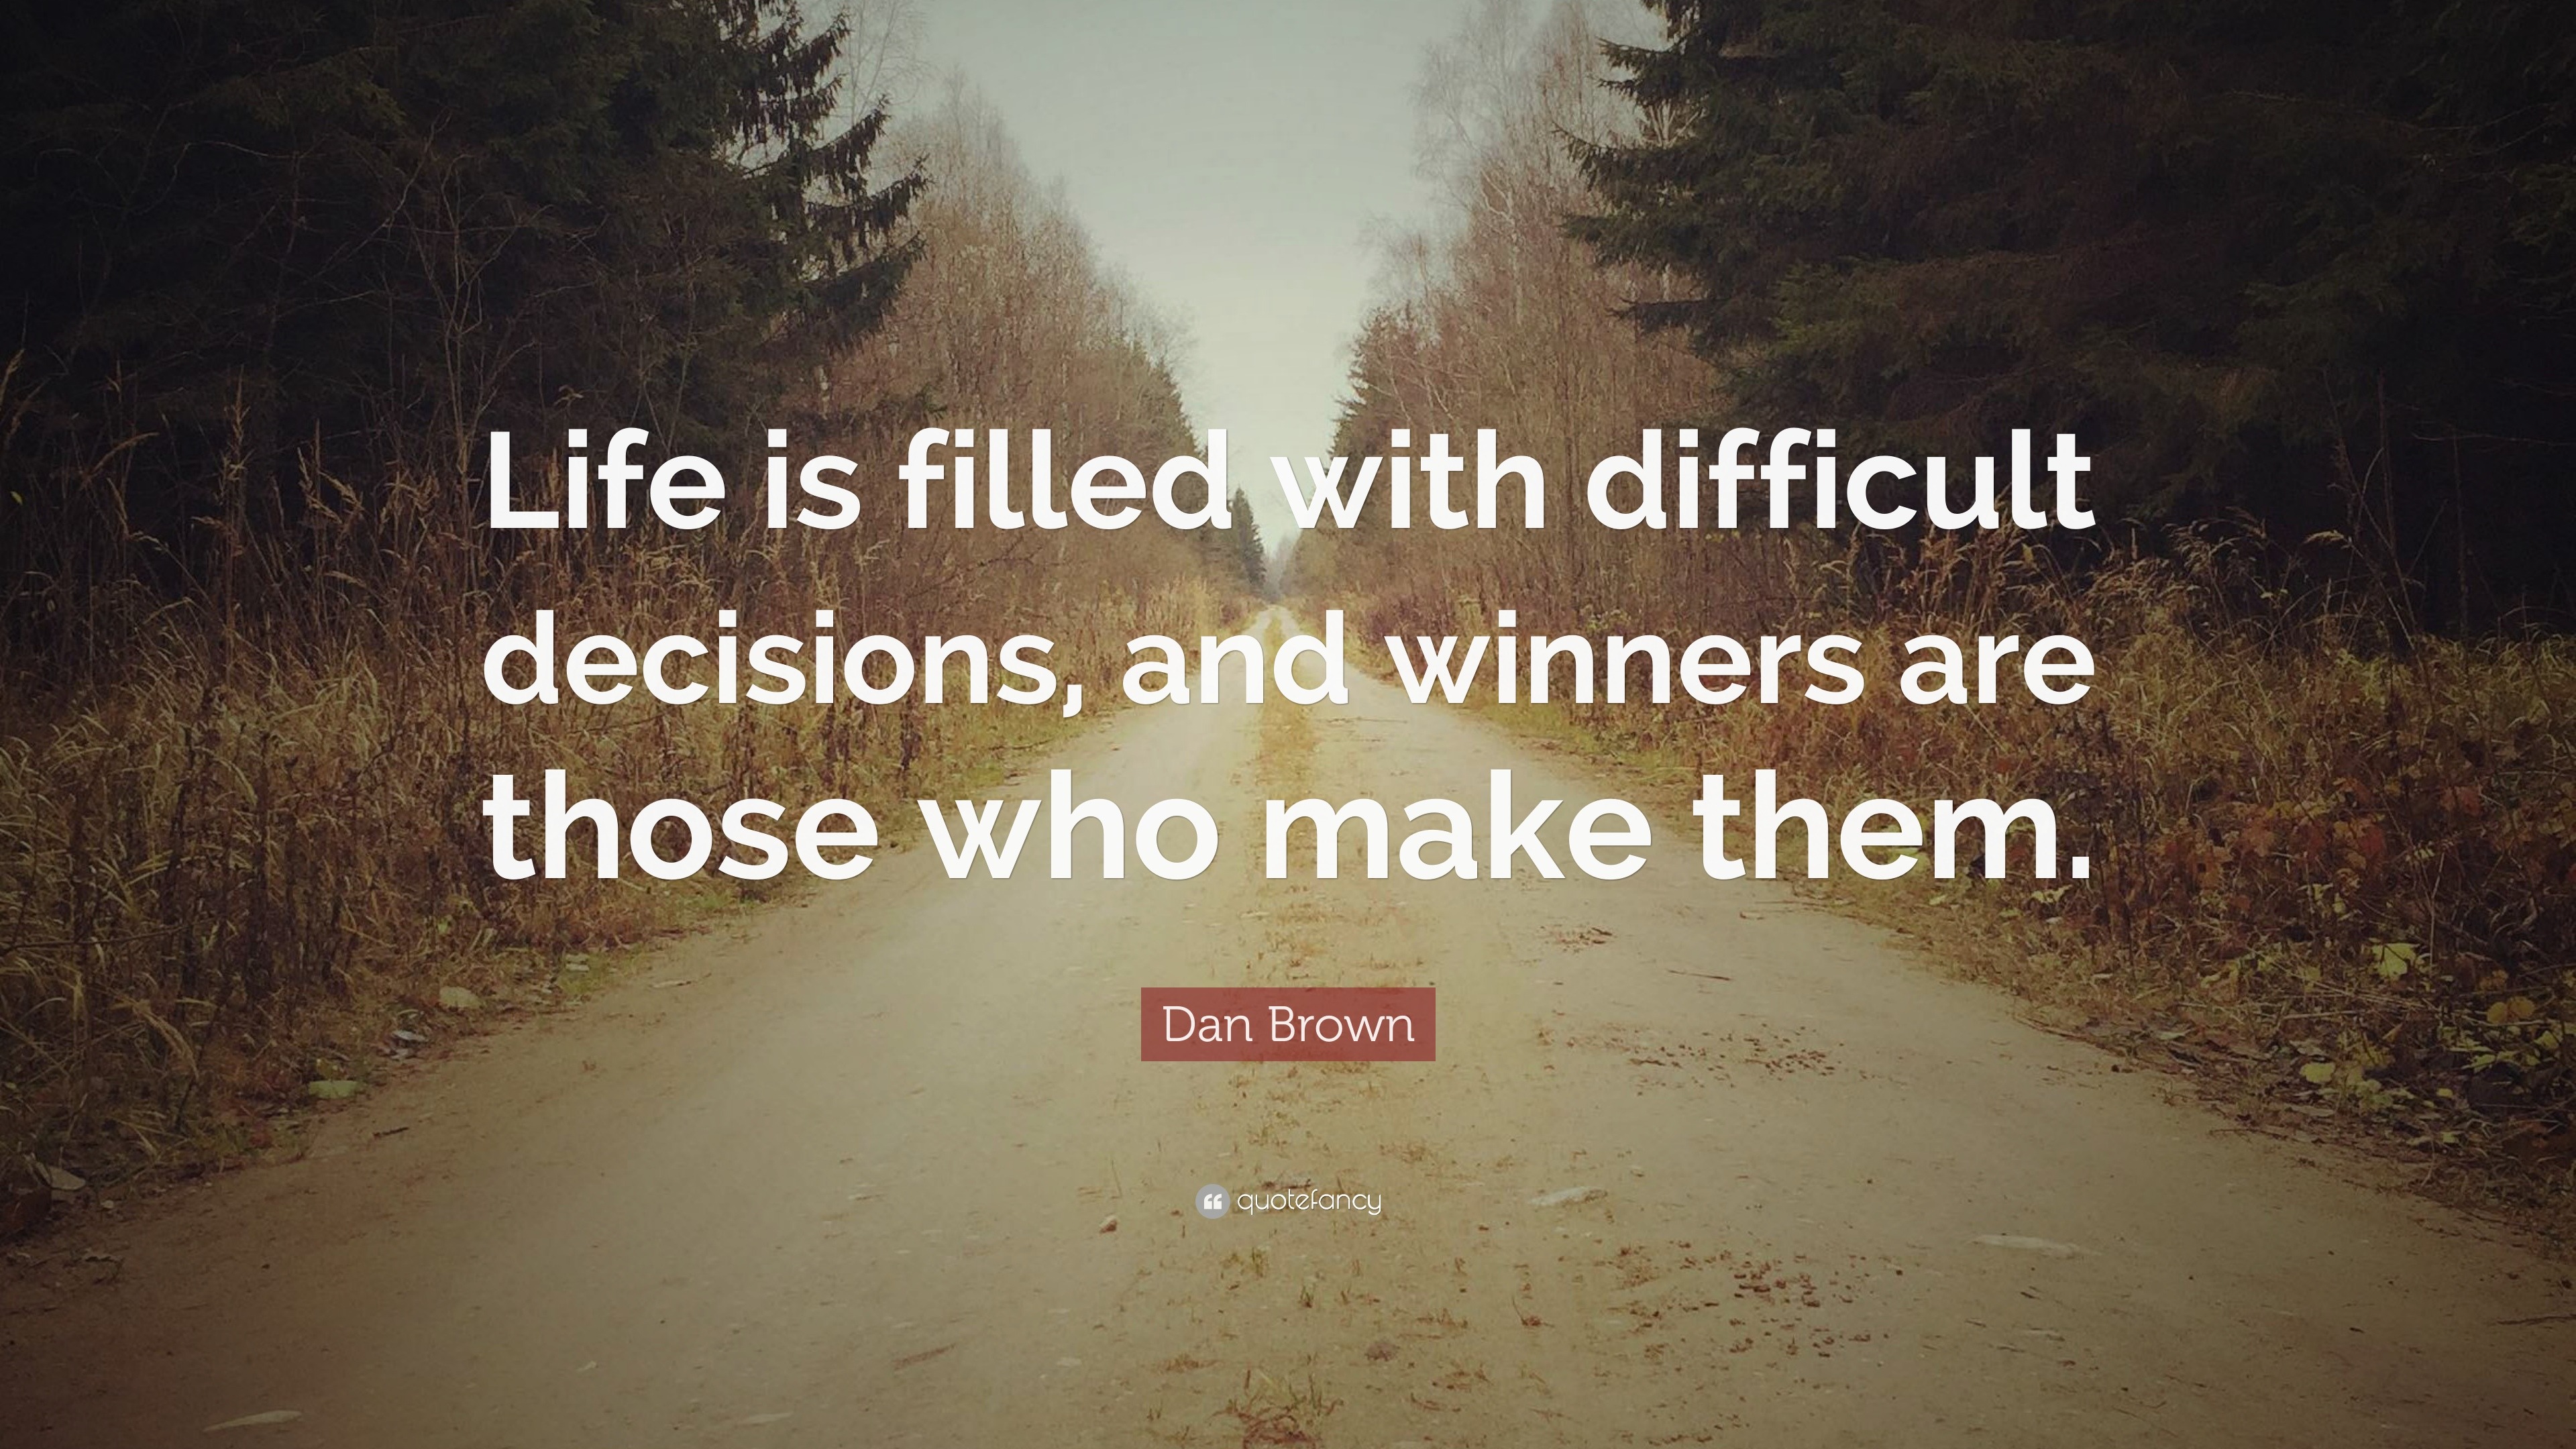 Dan Brown Quote “Life is filled with difficult decisions